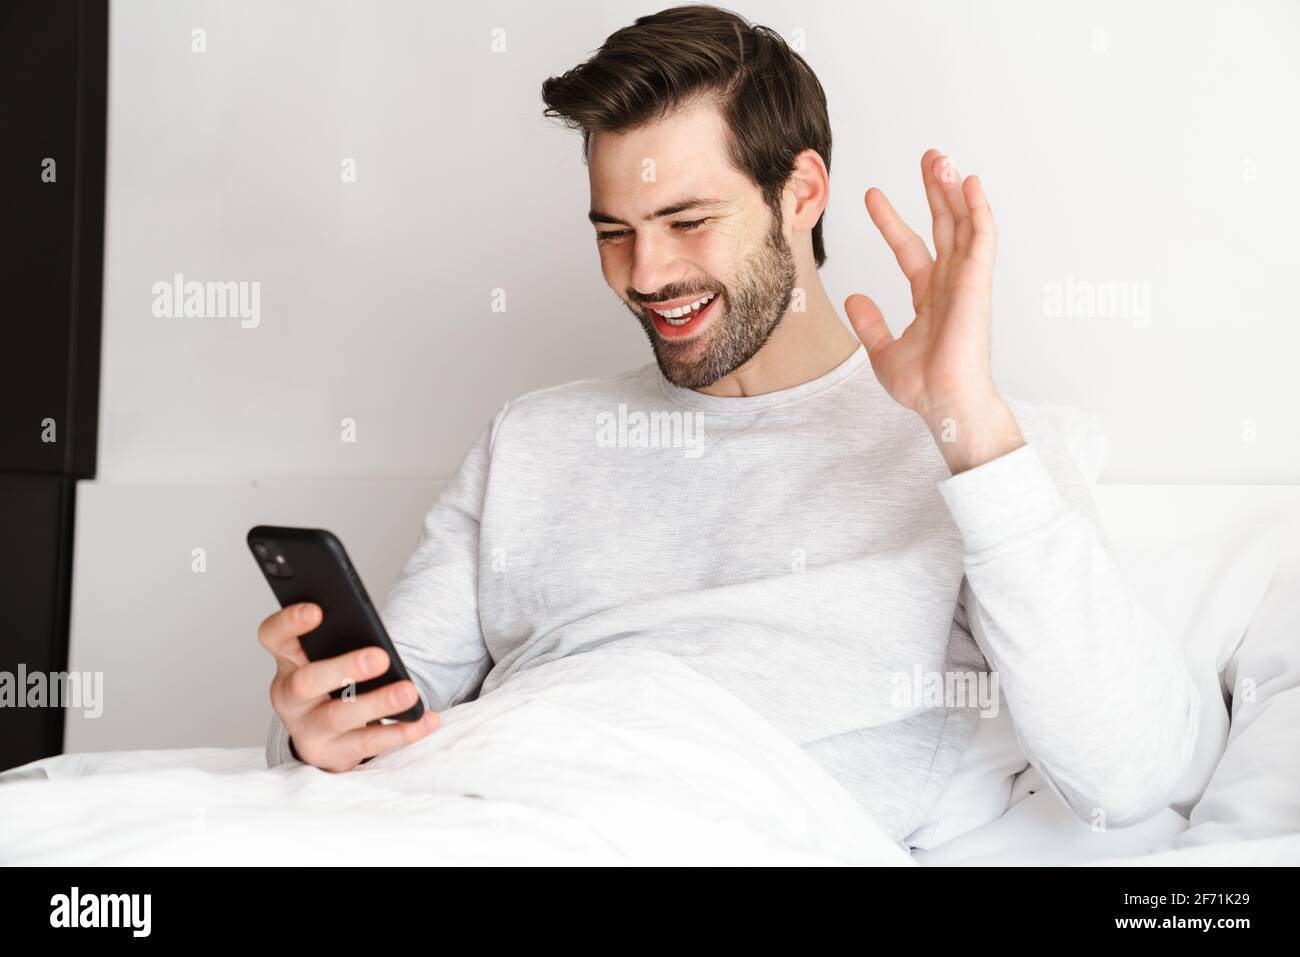 Smiling man waving hand and using mobile phone while resting in bed at home Stock Photo